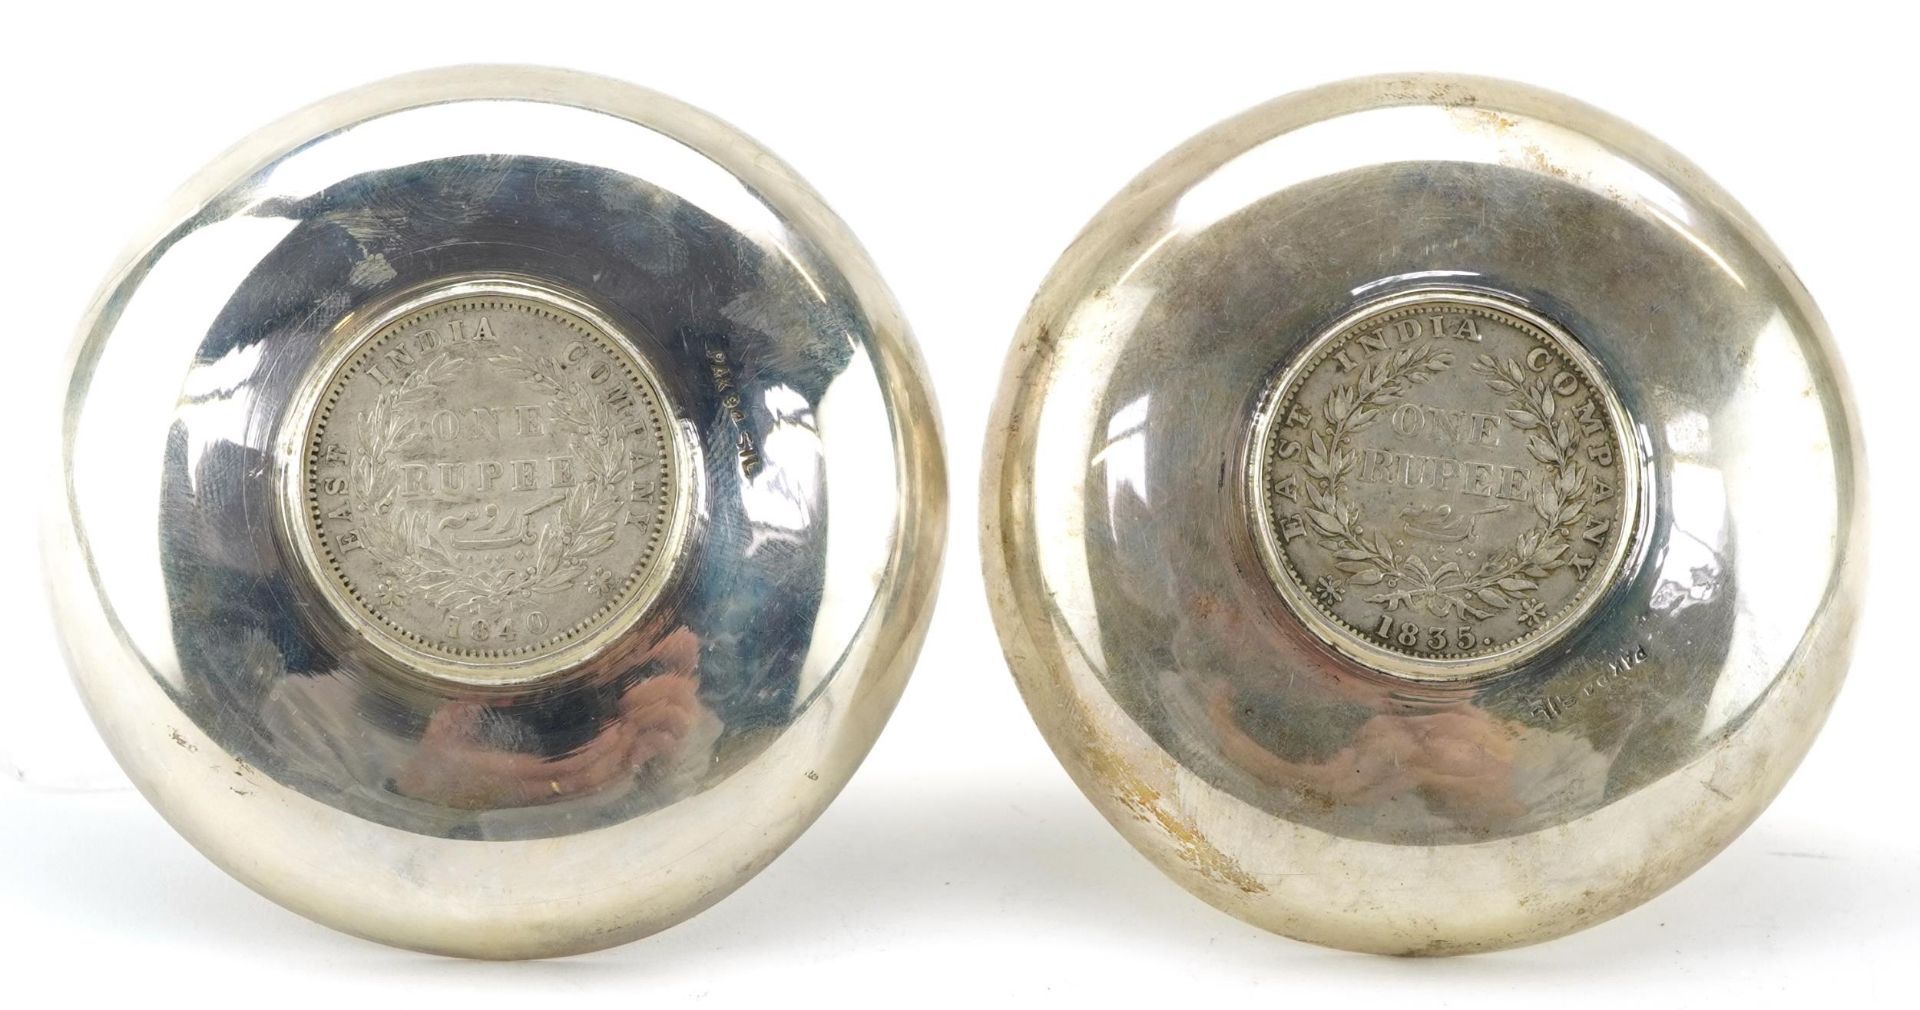 Pair of Indian circular silver 1835 and 1840 one rupee coin dishes, 8cm in diameter, 77.8g - Image 4 of 6